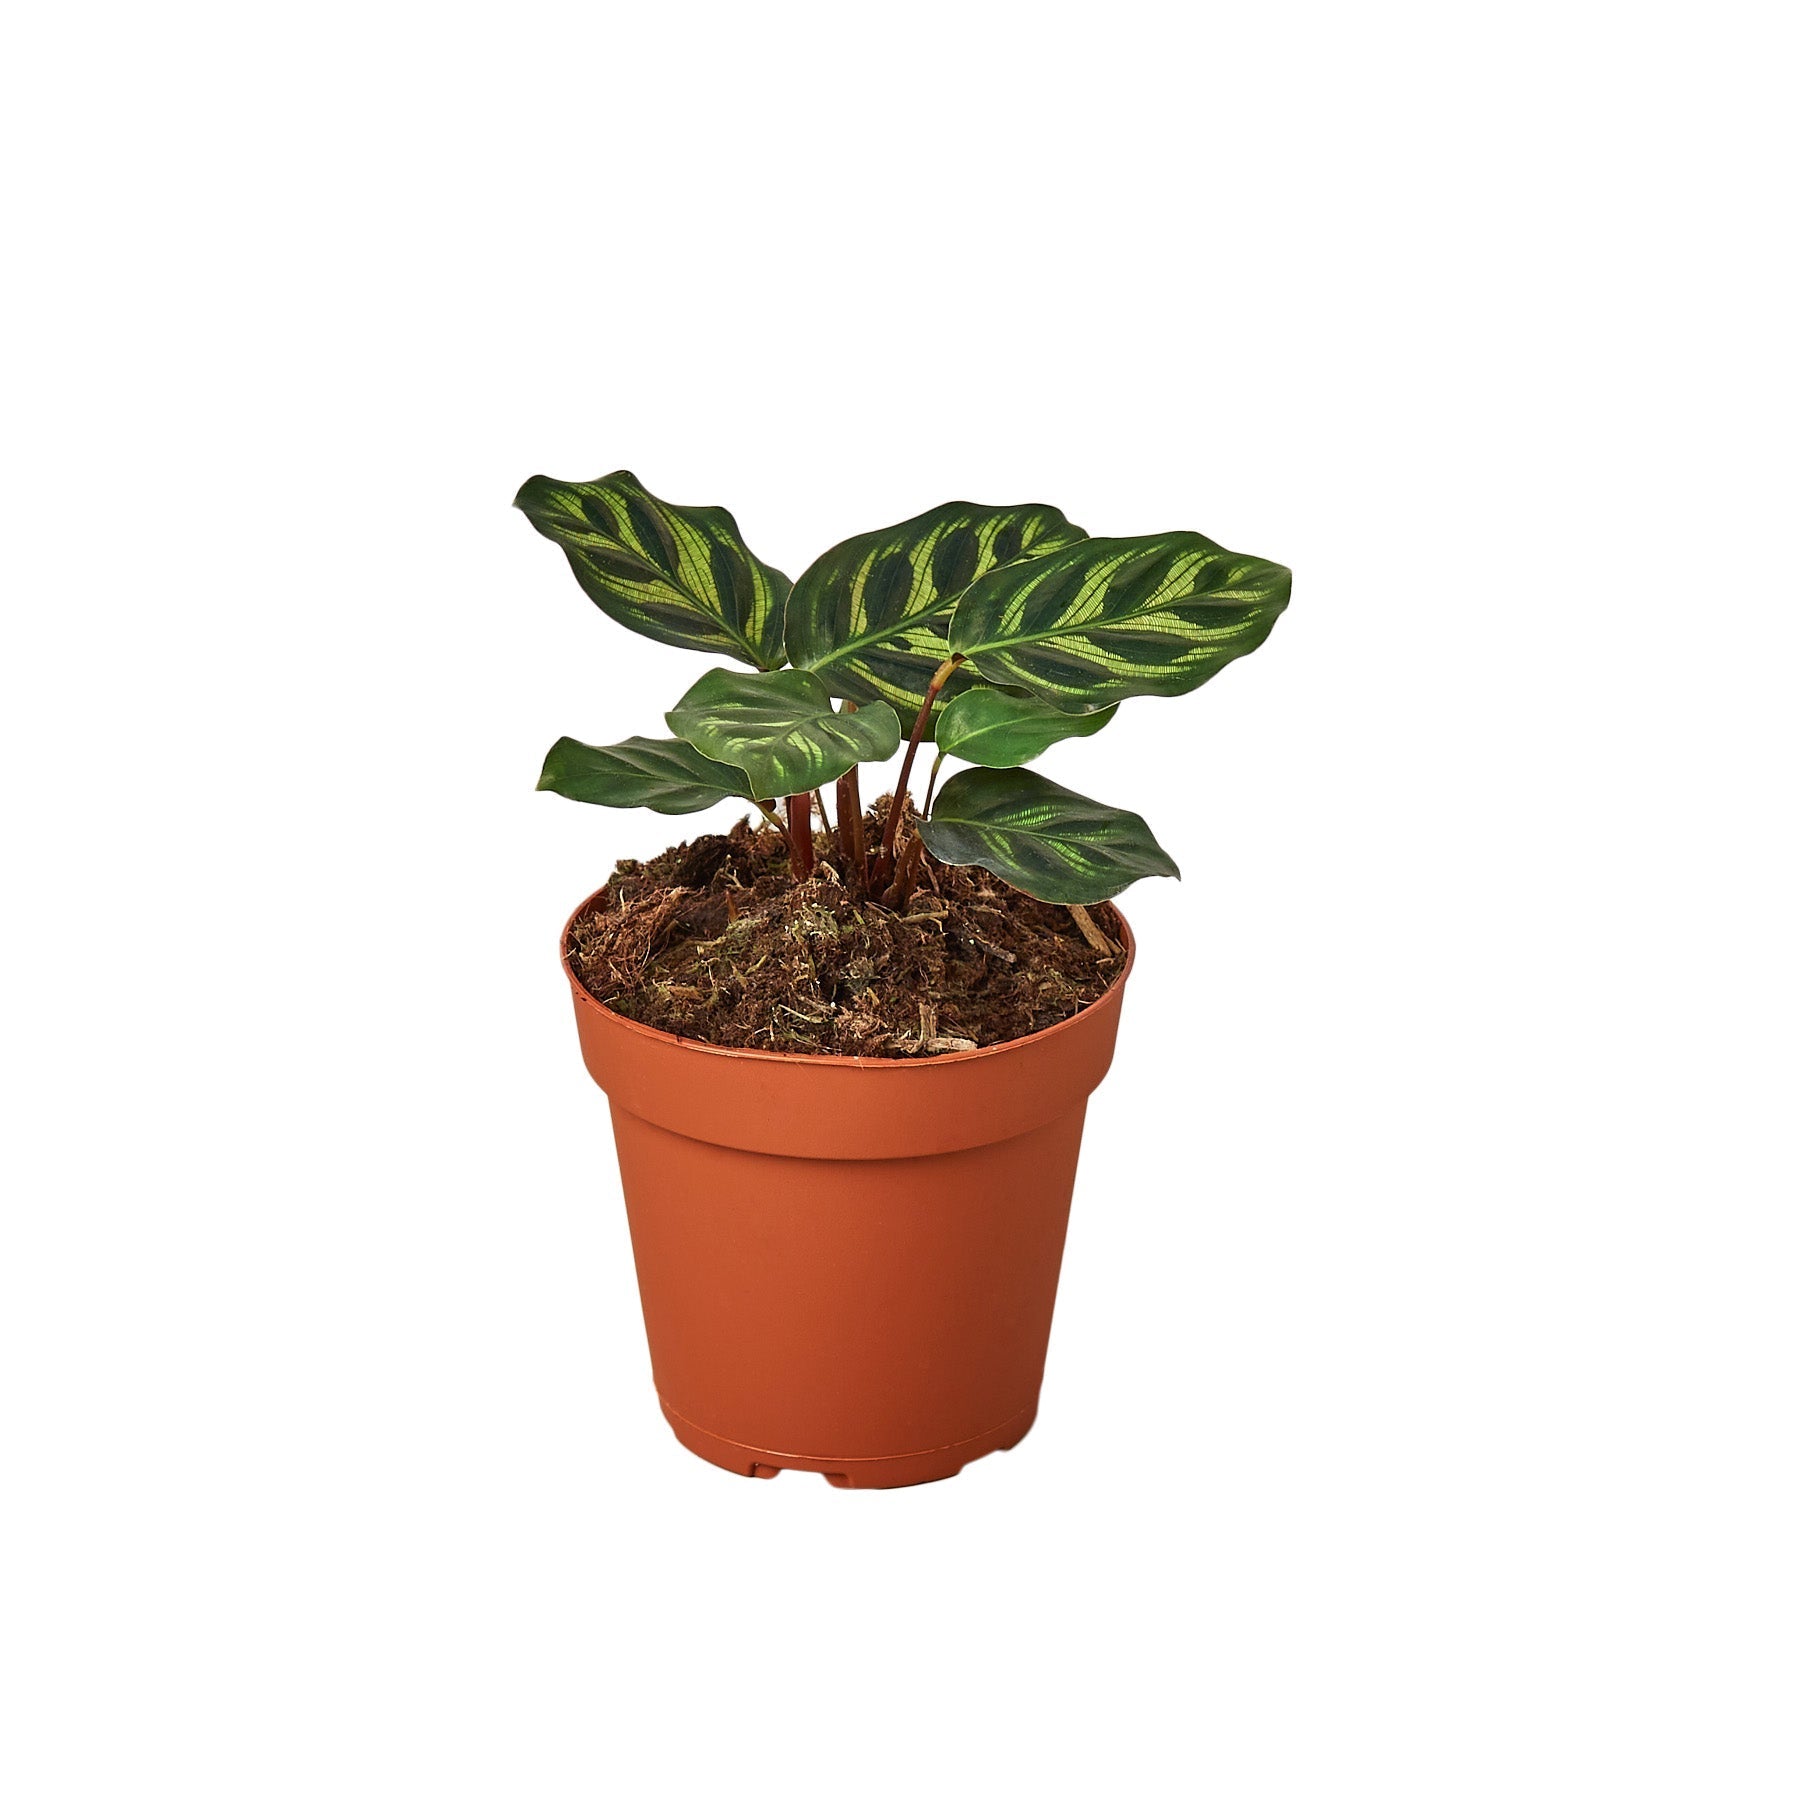 A small plant in a pot on a white background, perfect for the best garden center near me.